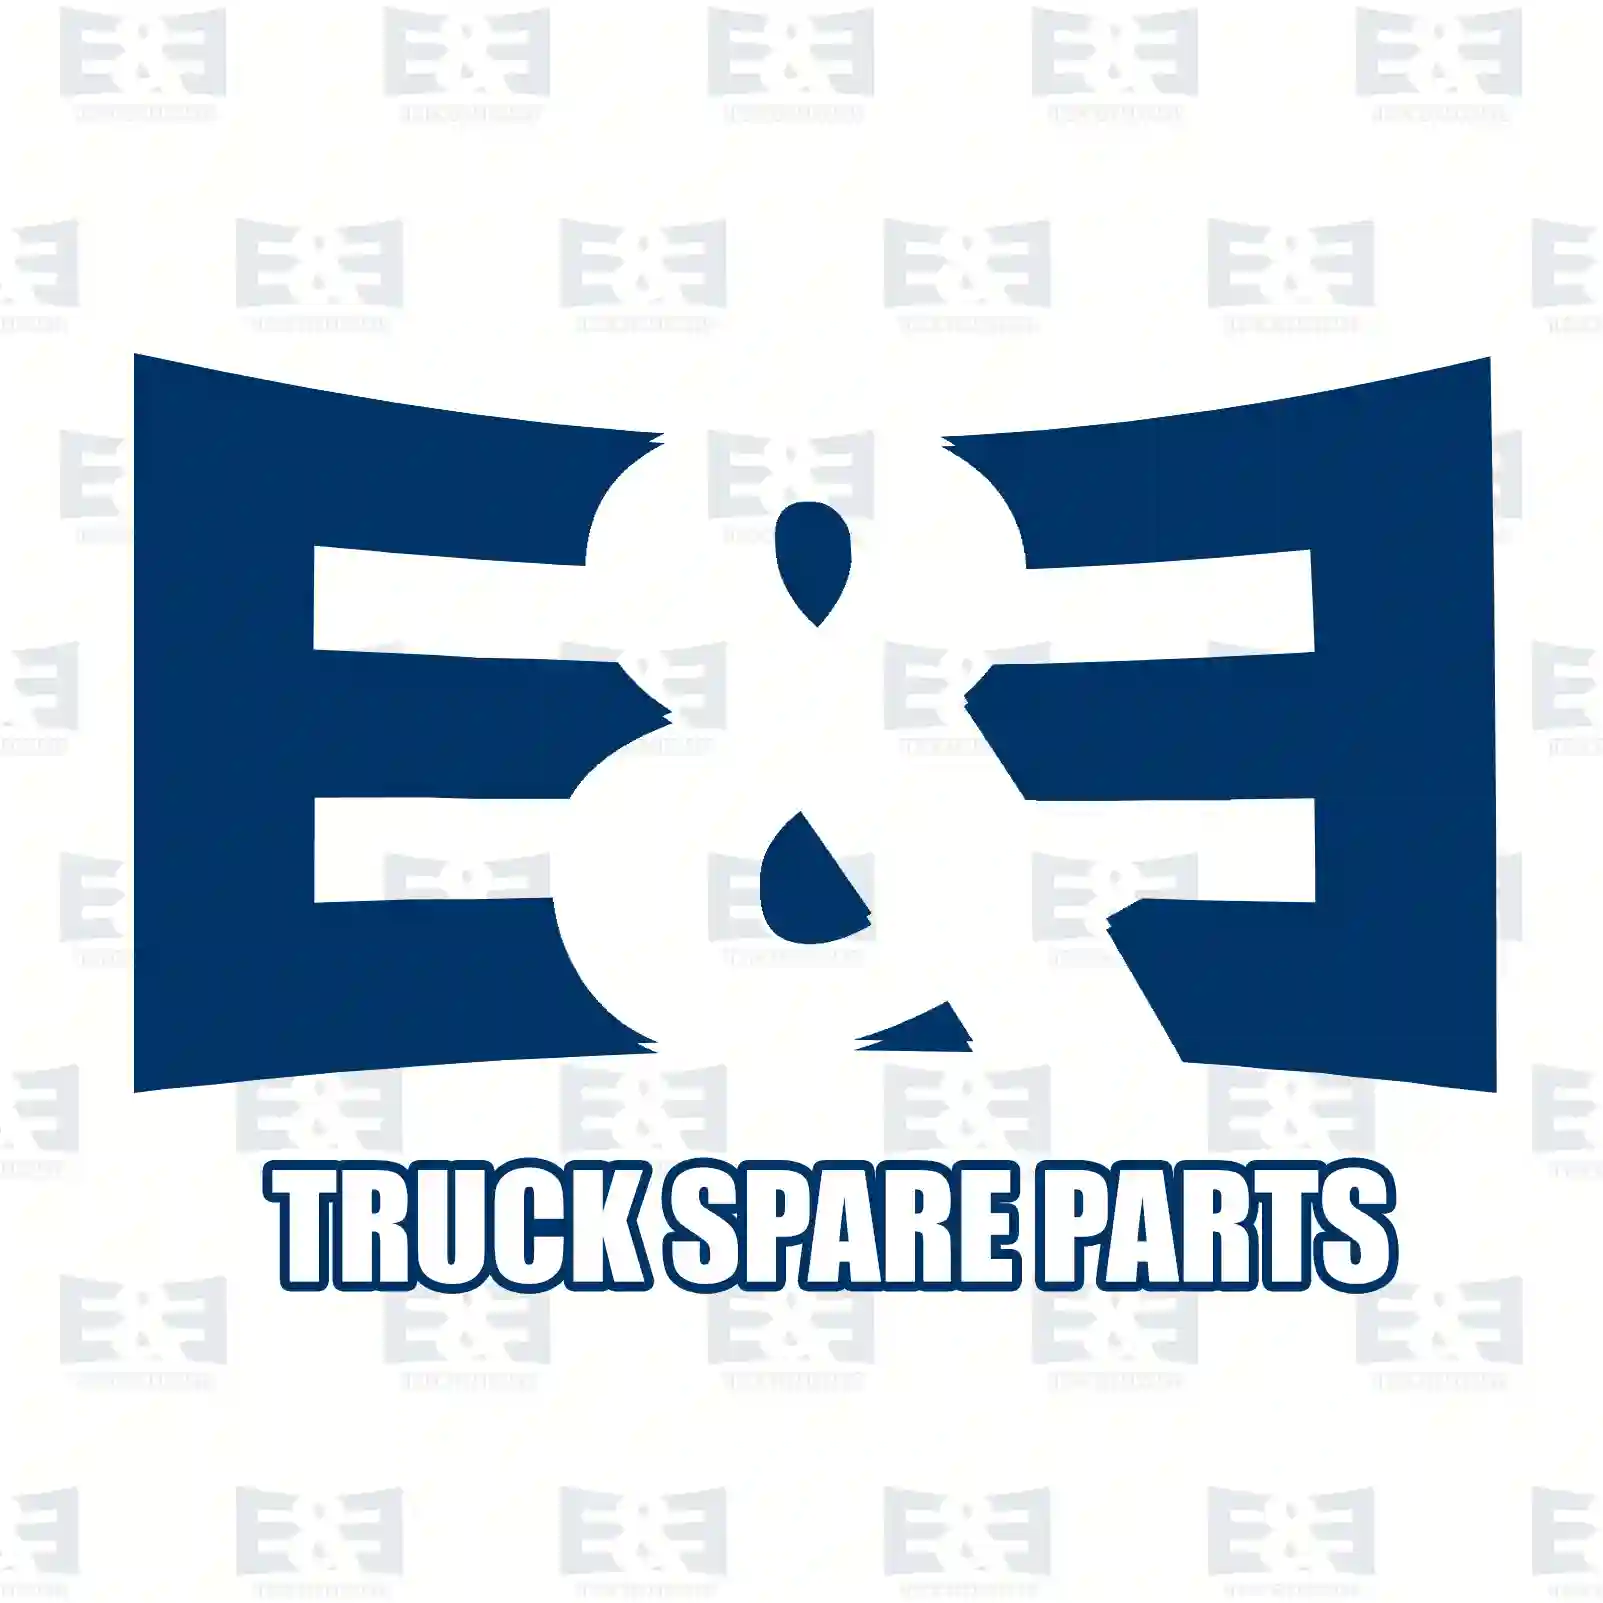  Axial washer || E&E Truck Spare Parts | Truck Spare Parts, Auotomotive Spare Parts